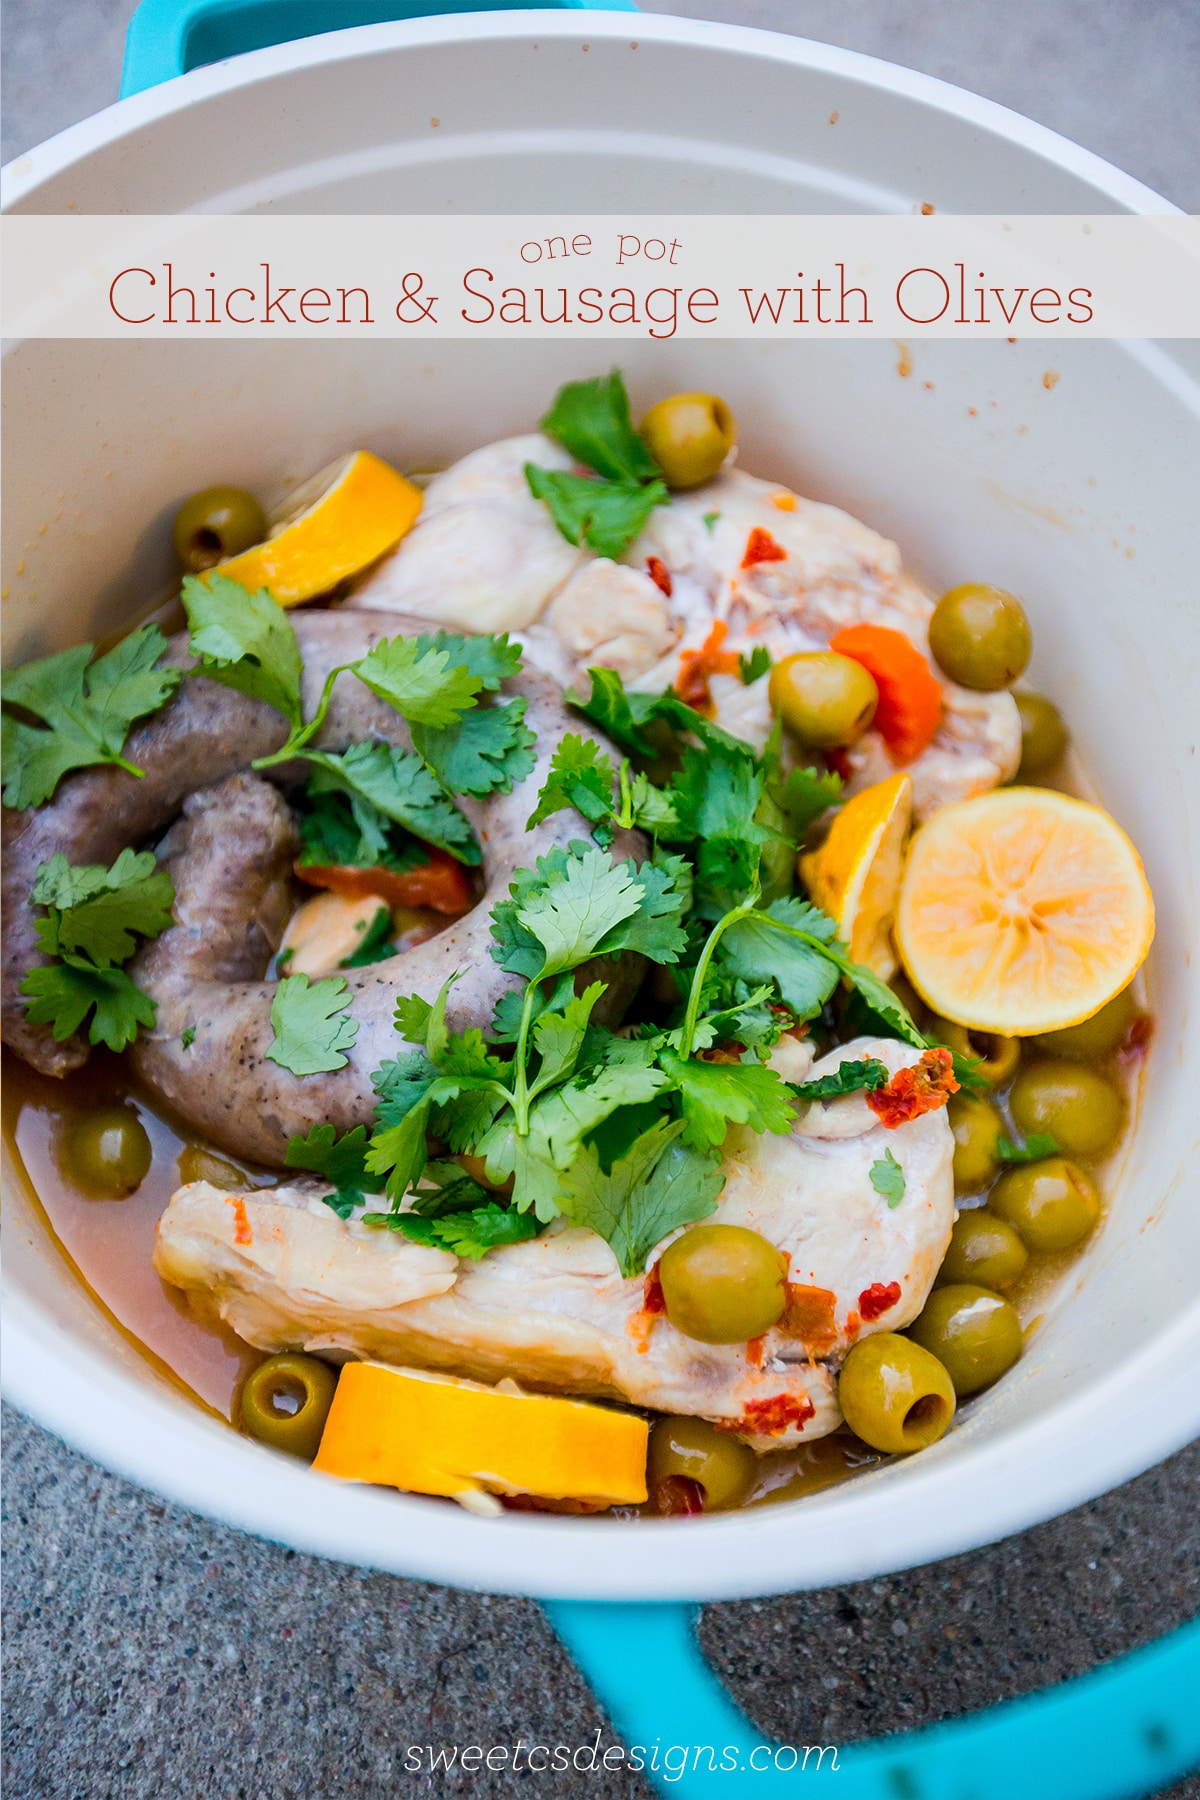 This recipe is SO delicious and only takes four ingredients- chicken and sausage with olives and lemon!